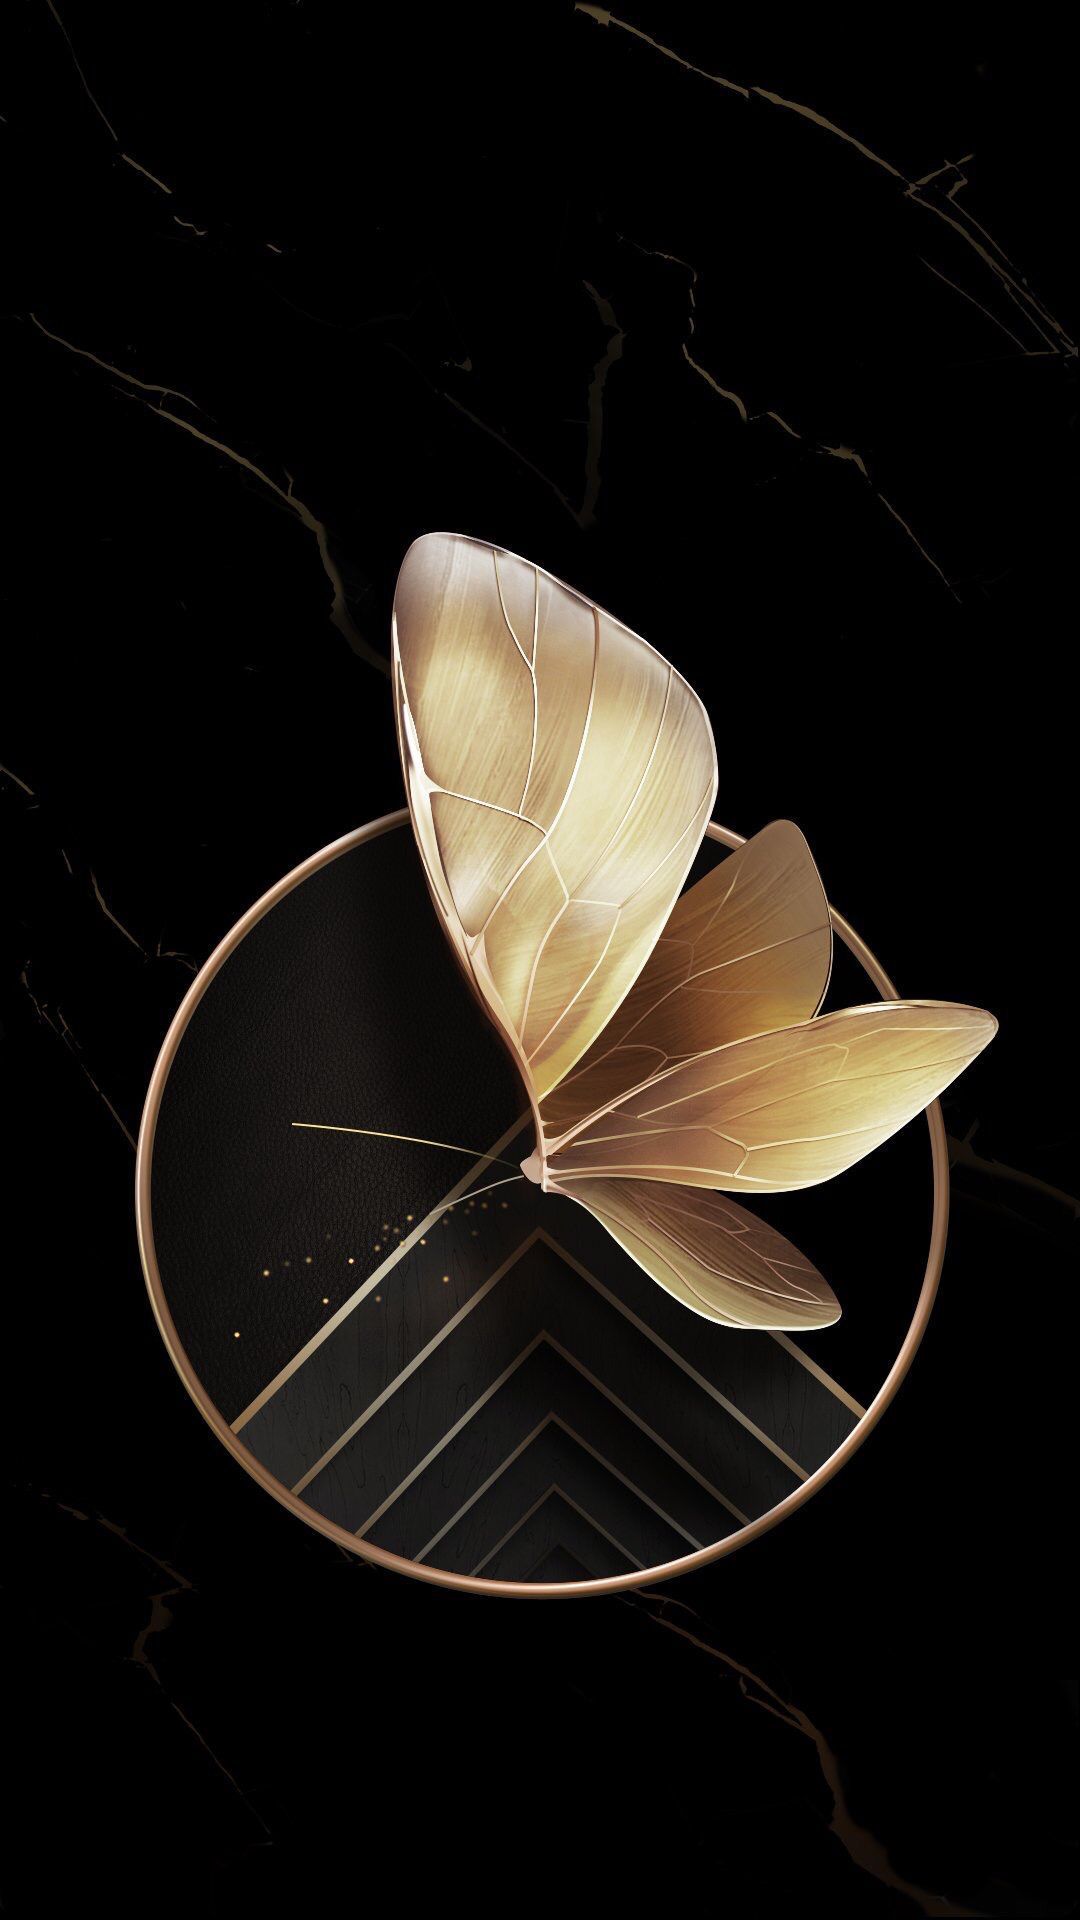 A butterfly sitting on top of an object - Gold